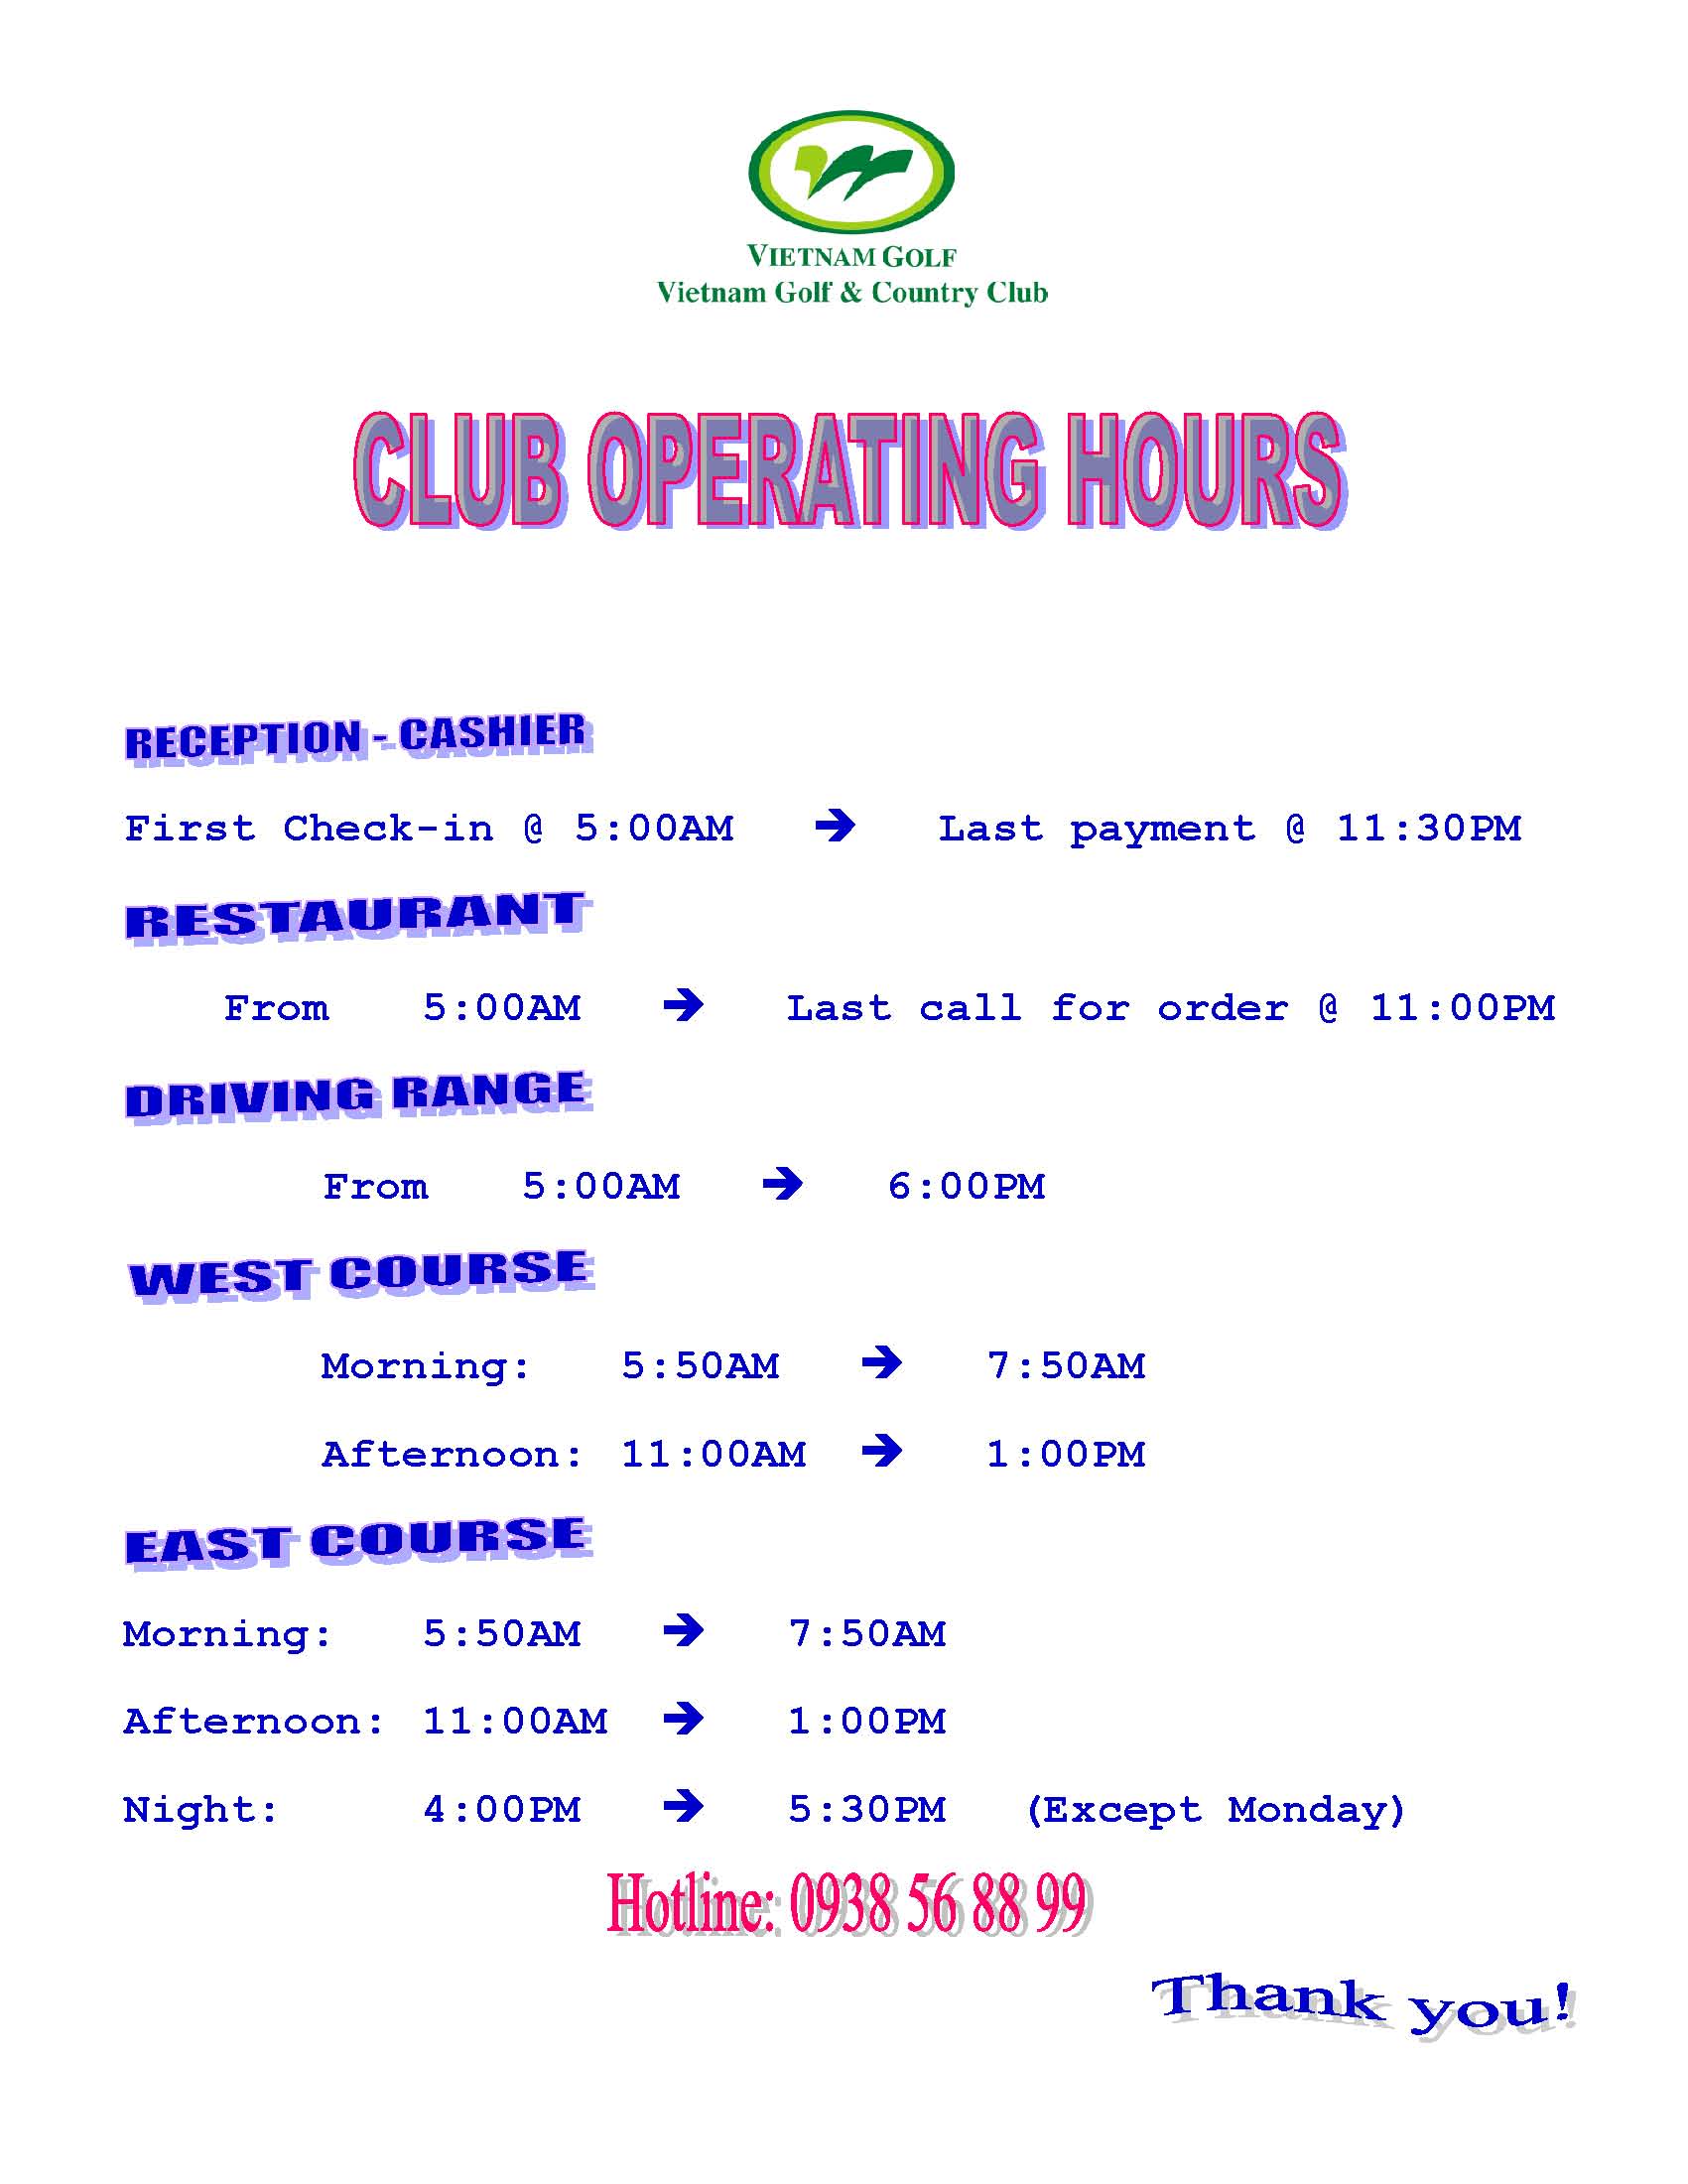 CLUB-OPERATING-HOURS_1